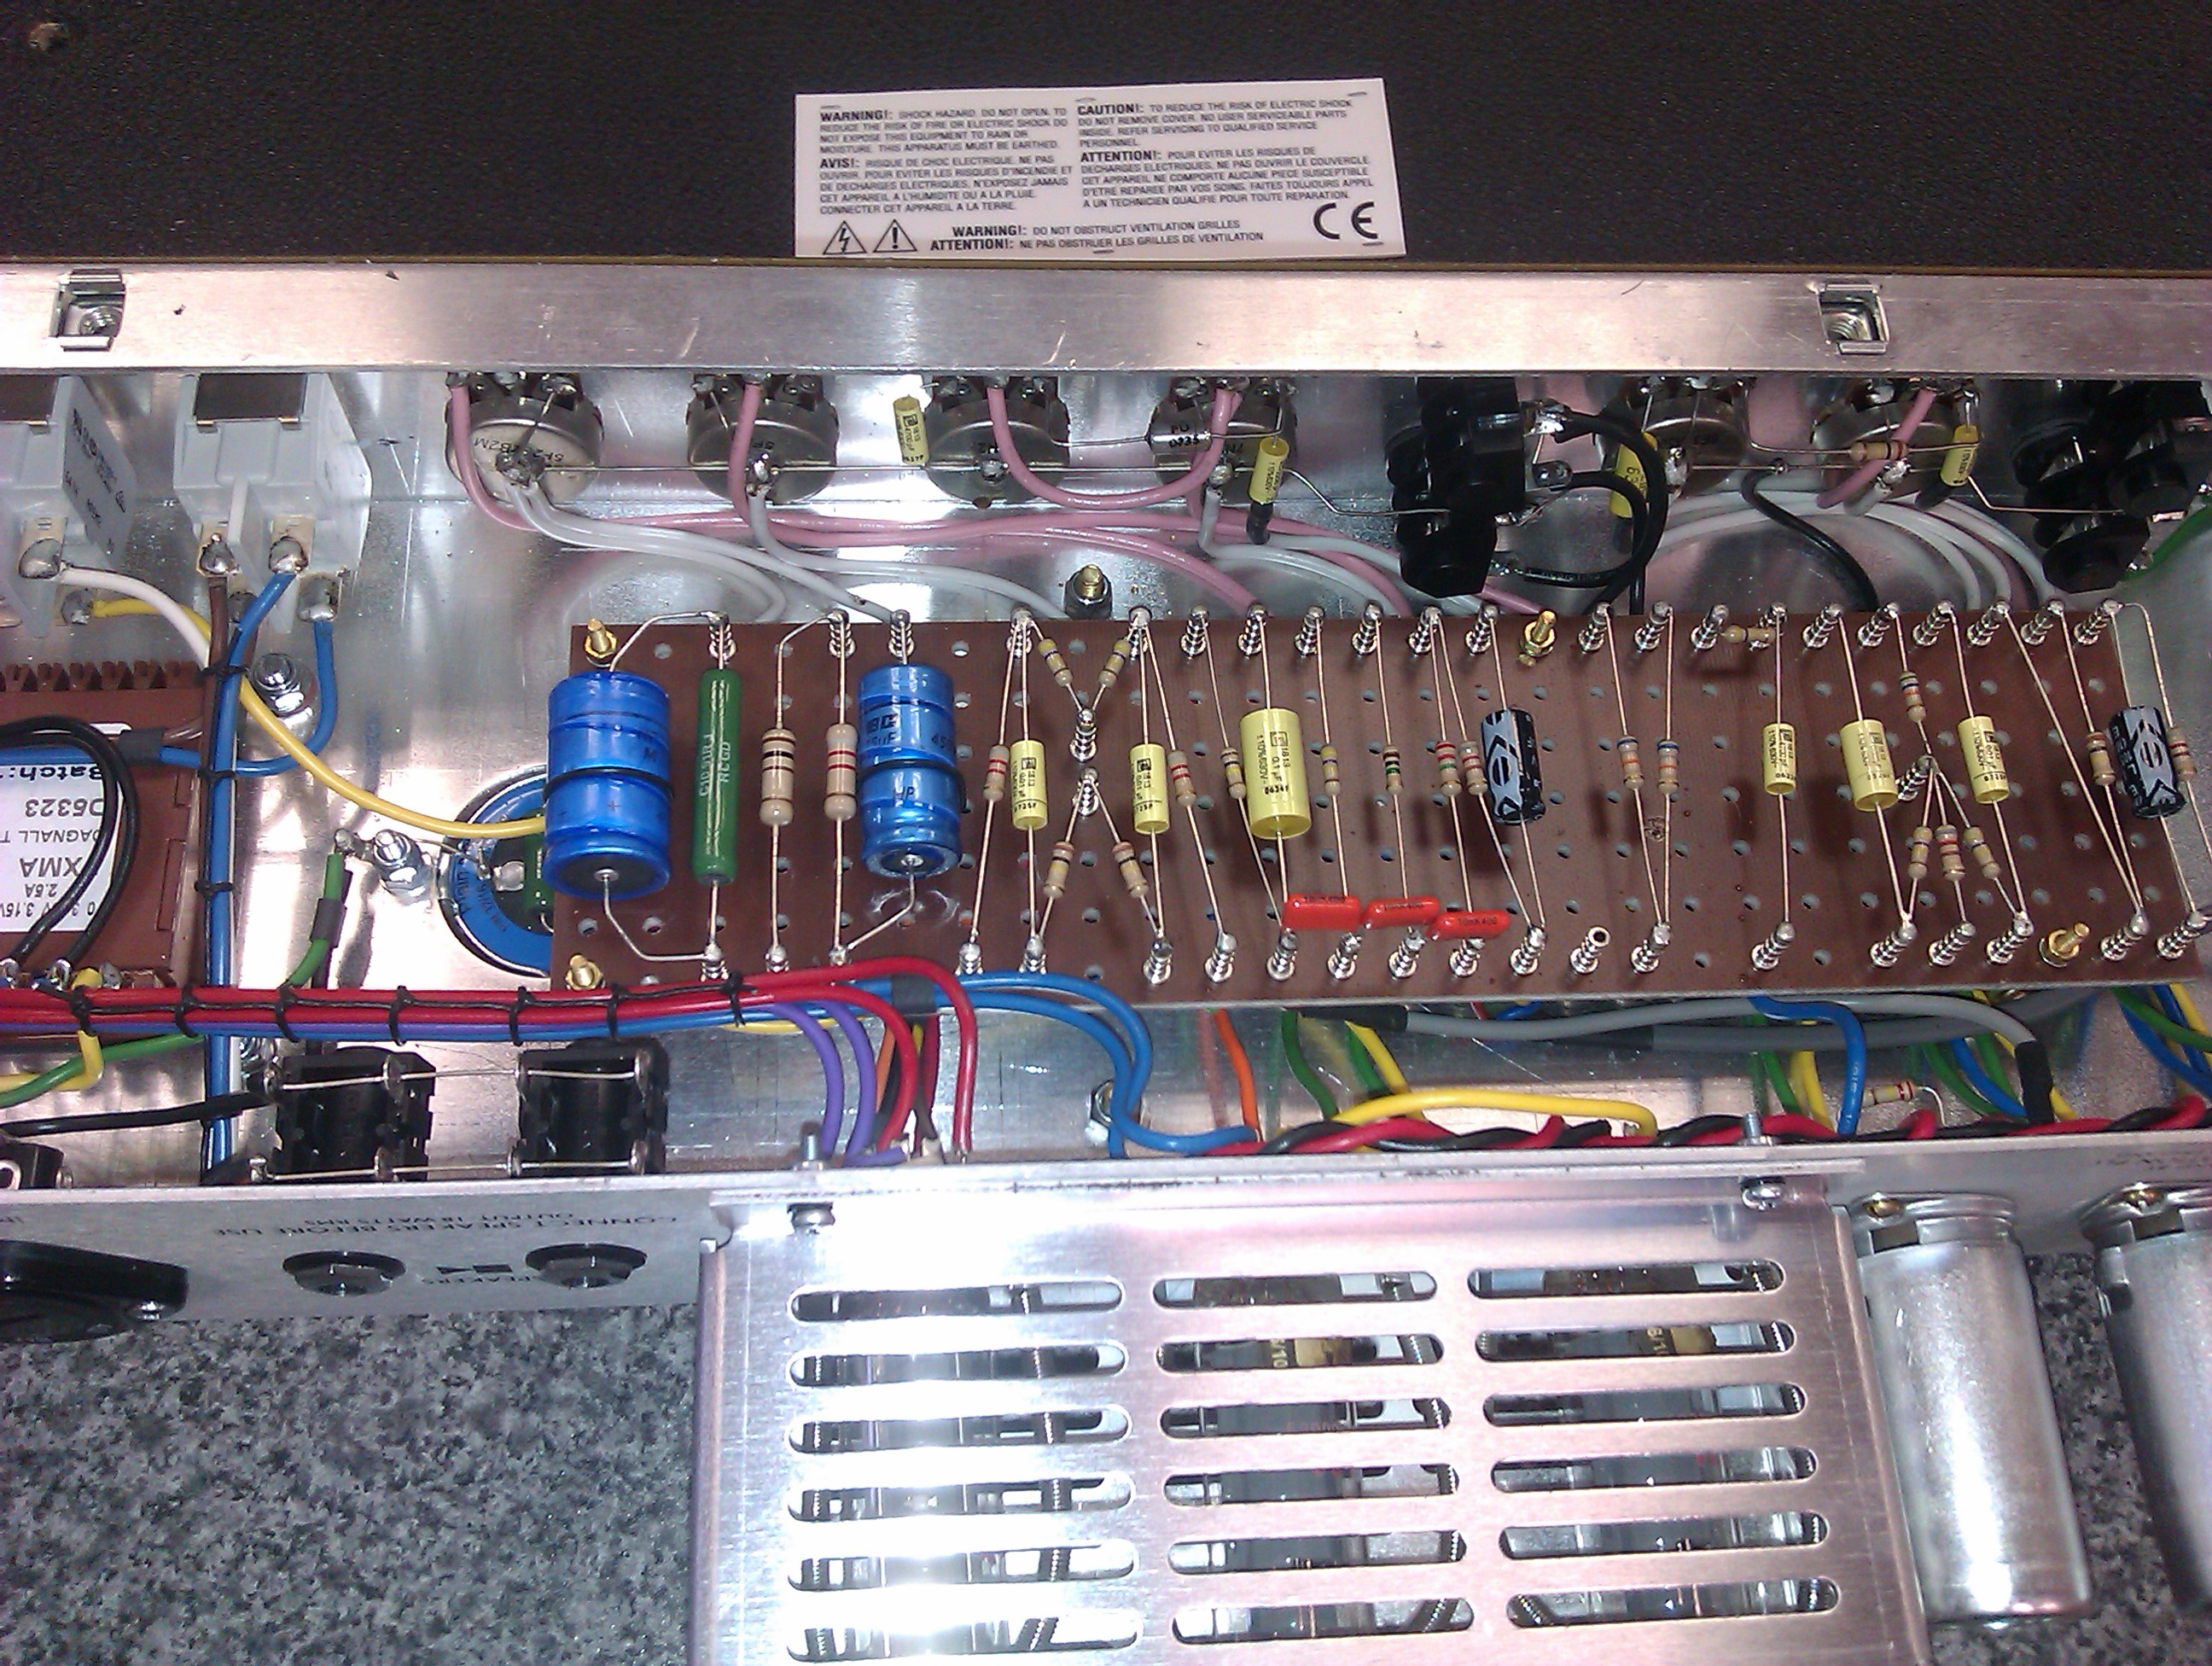 High quality wiring on this nice re-issue amplifier